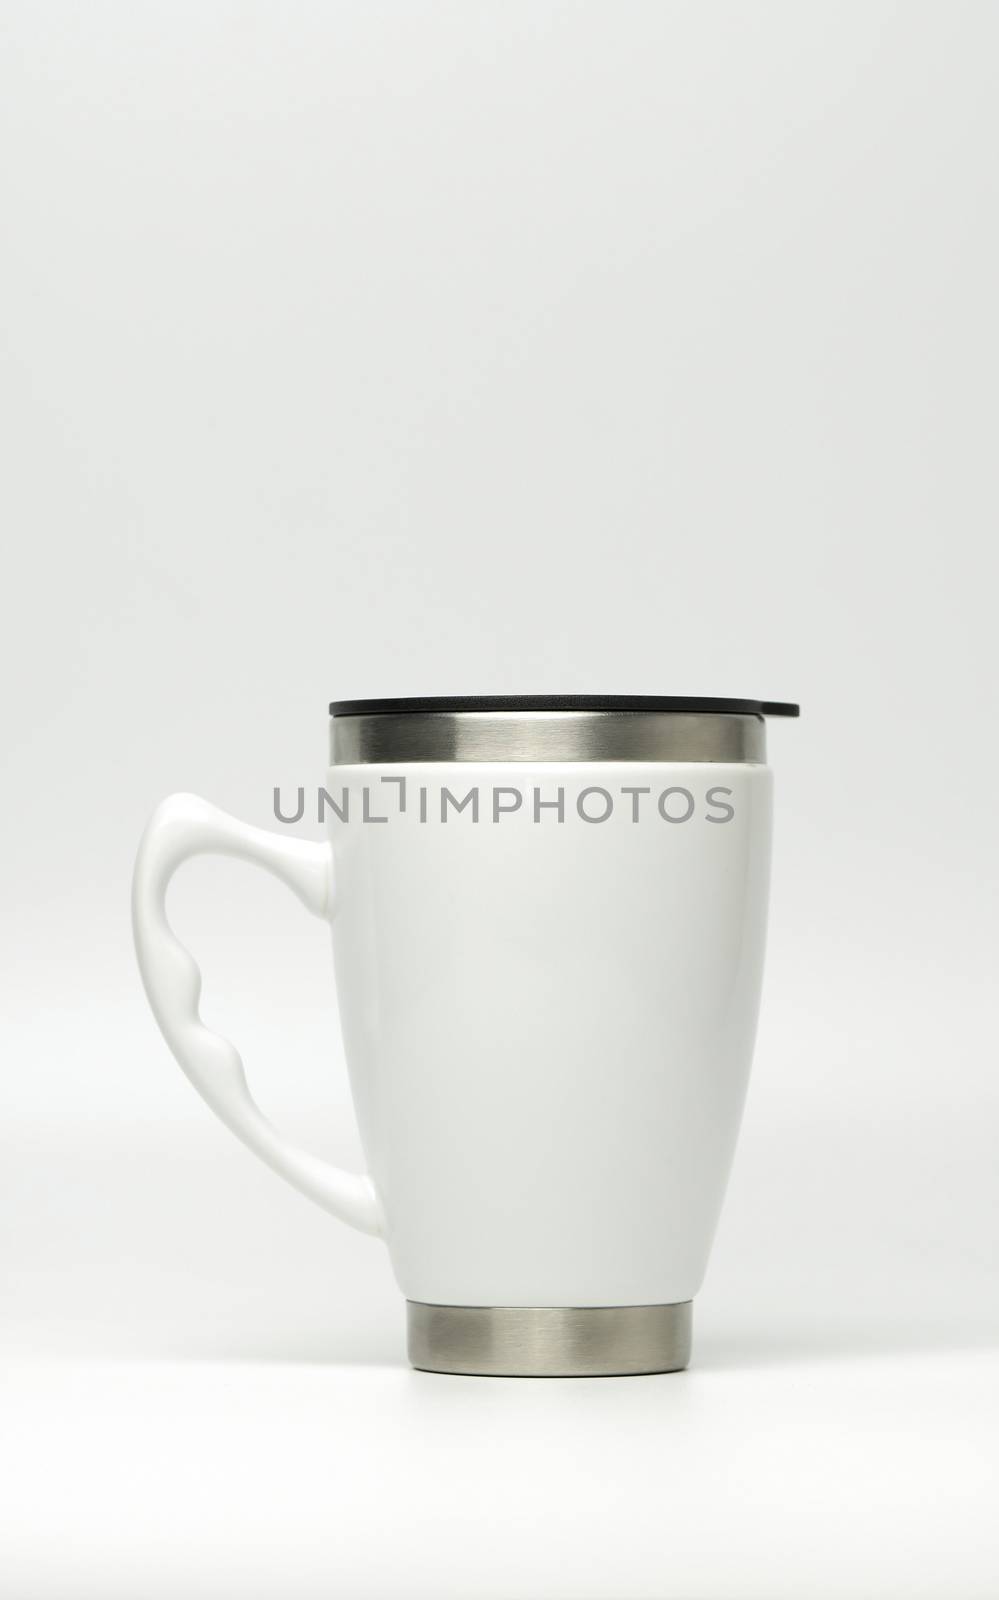 Thermos bottle on white background with copy space, just add your own text